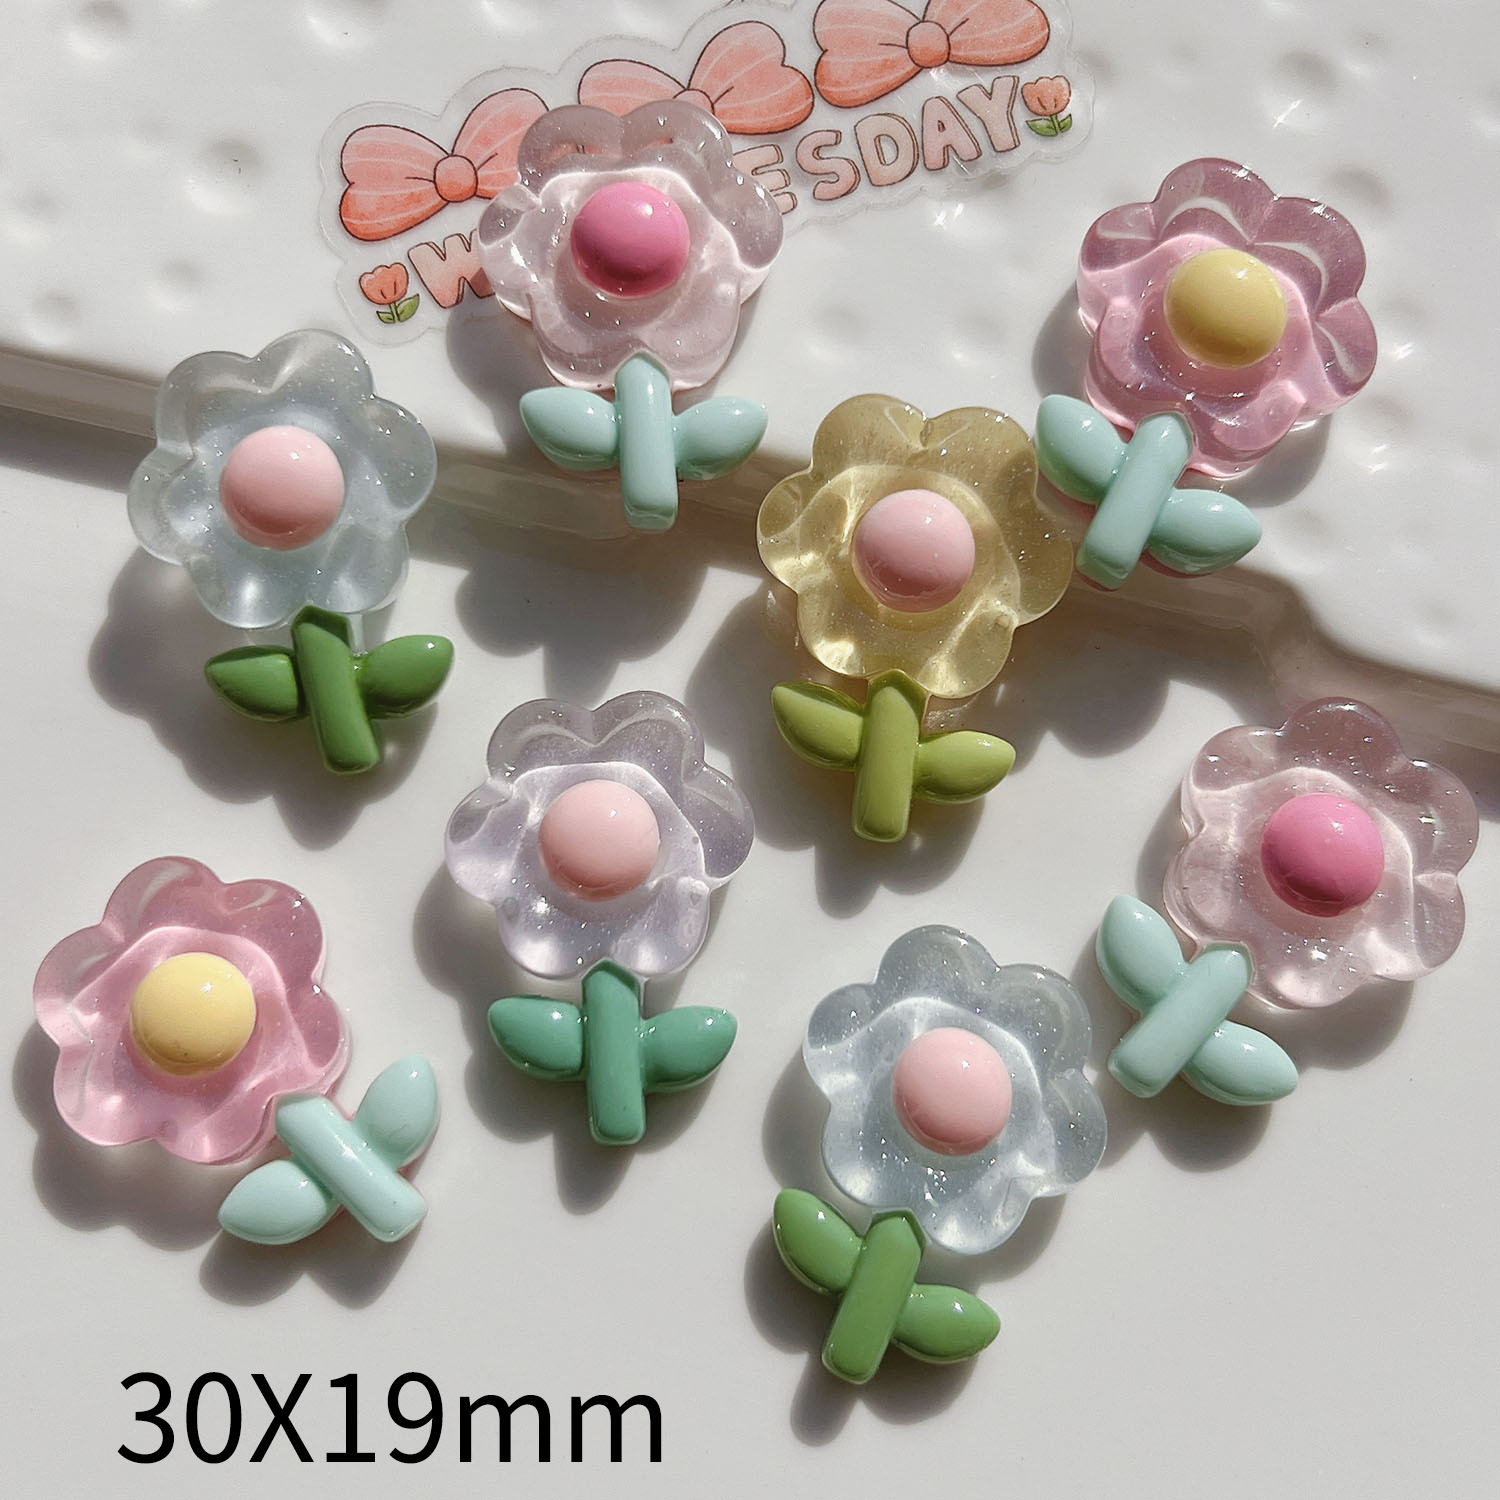 Cross border creative ice permeating sun, green leaves, flowers, diy cream gum resin accessories, handmade hair clips, shoe buckles, and hat stickers